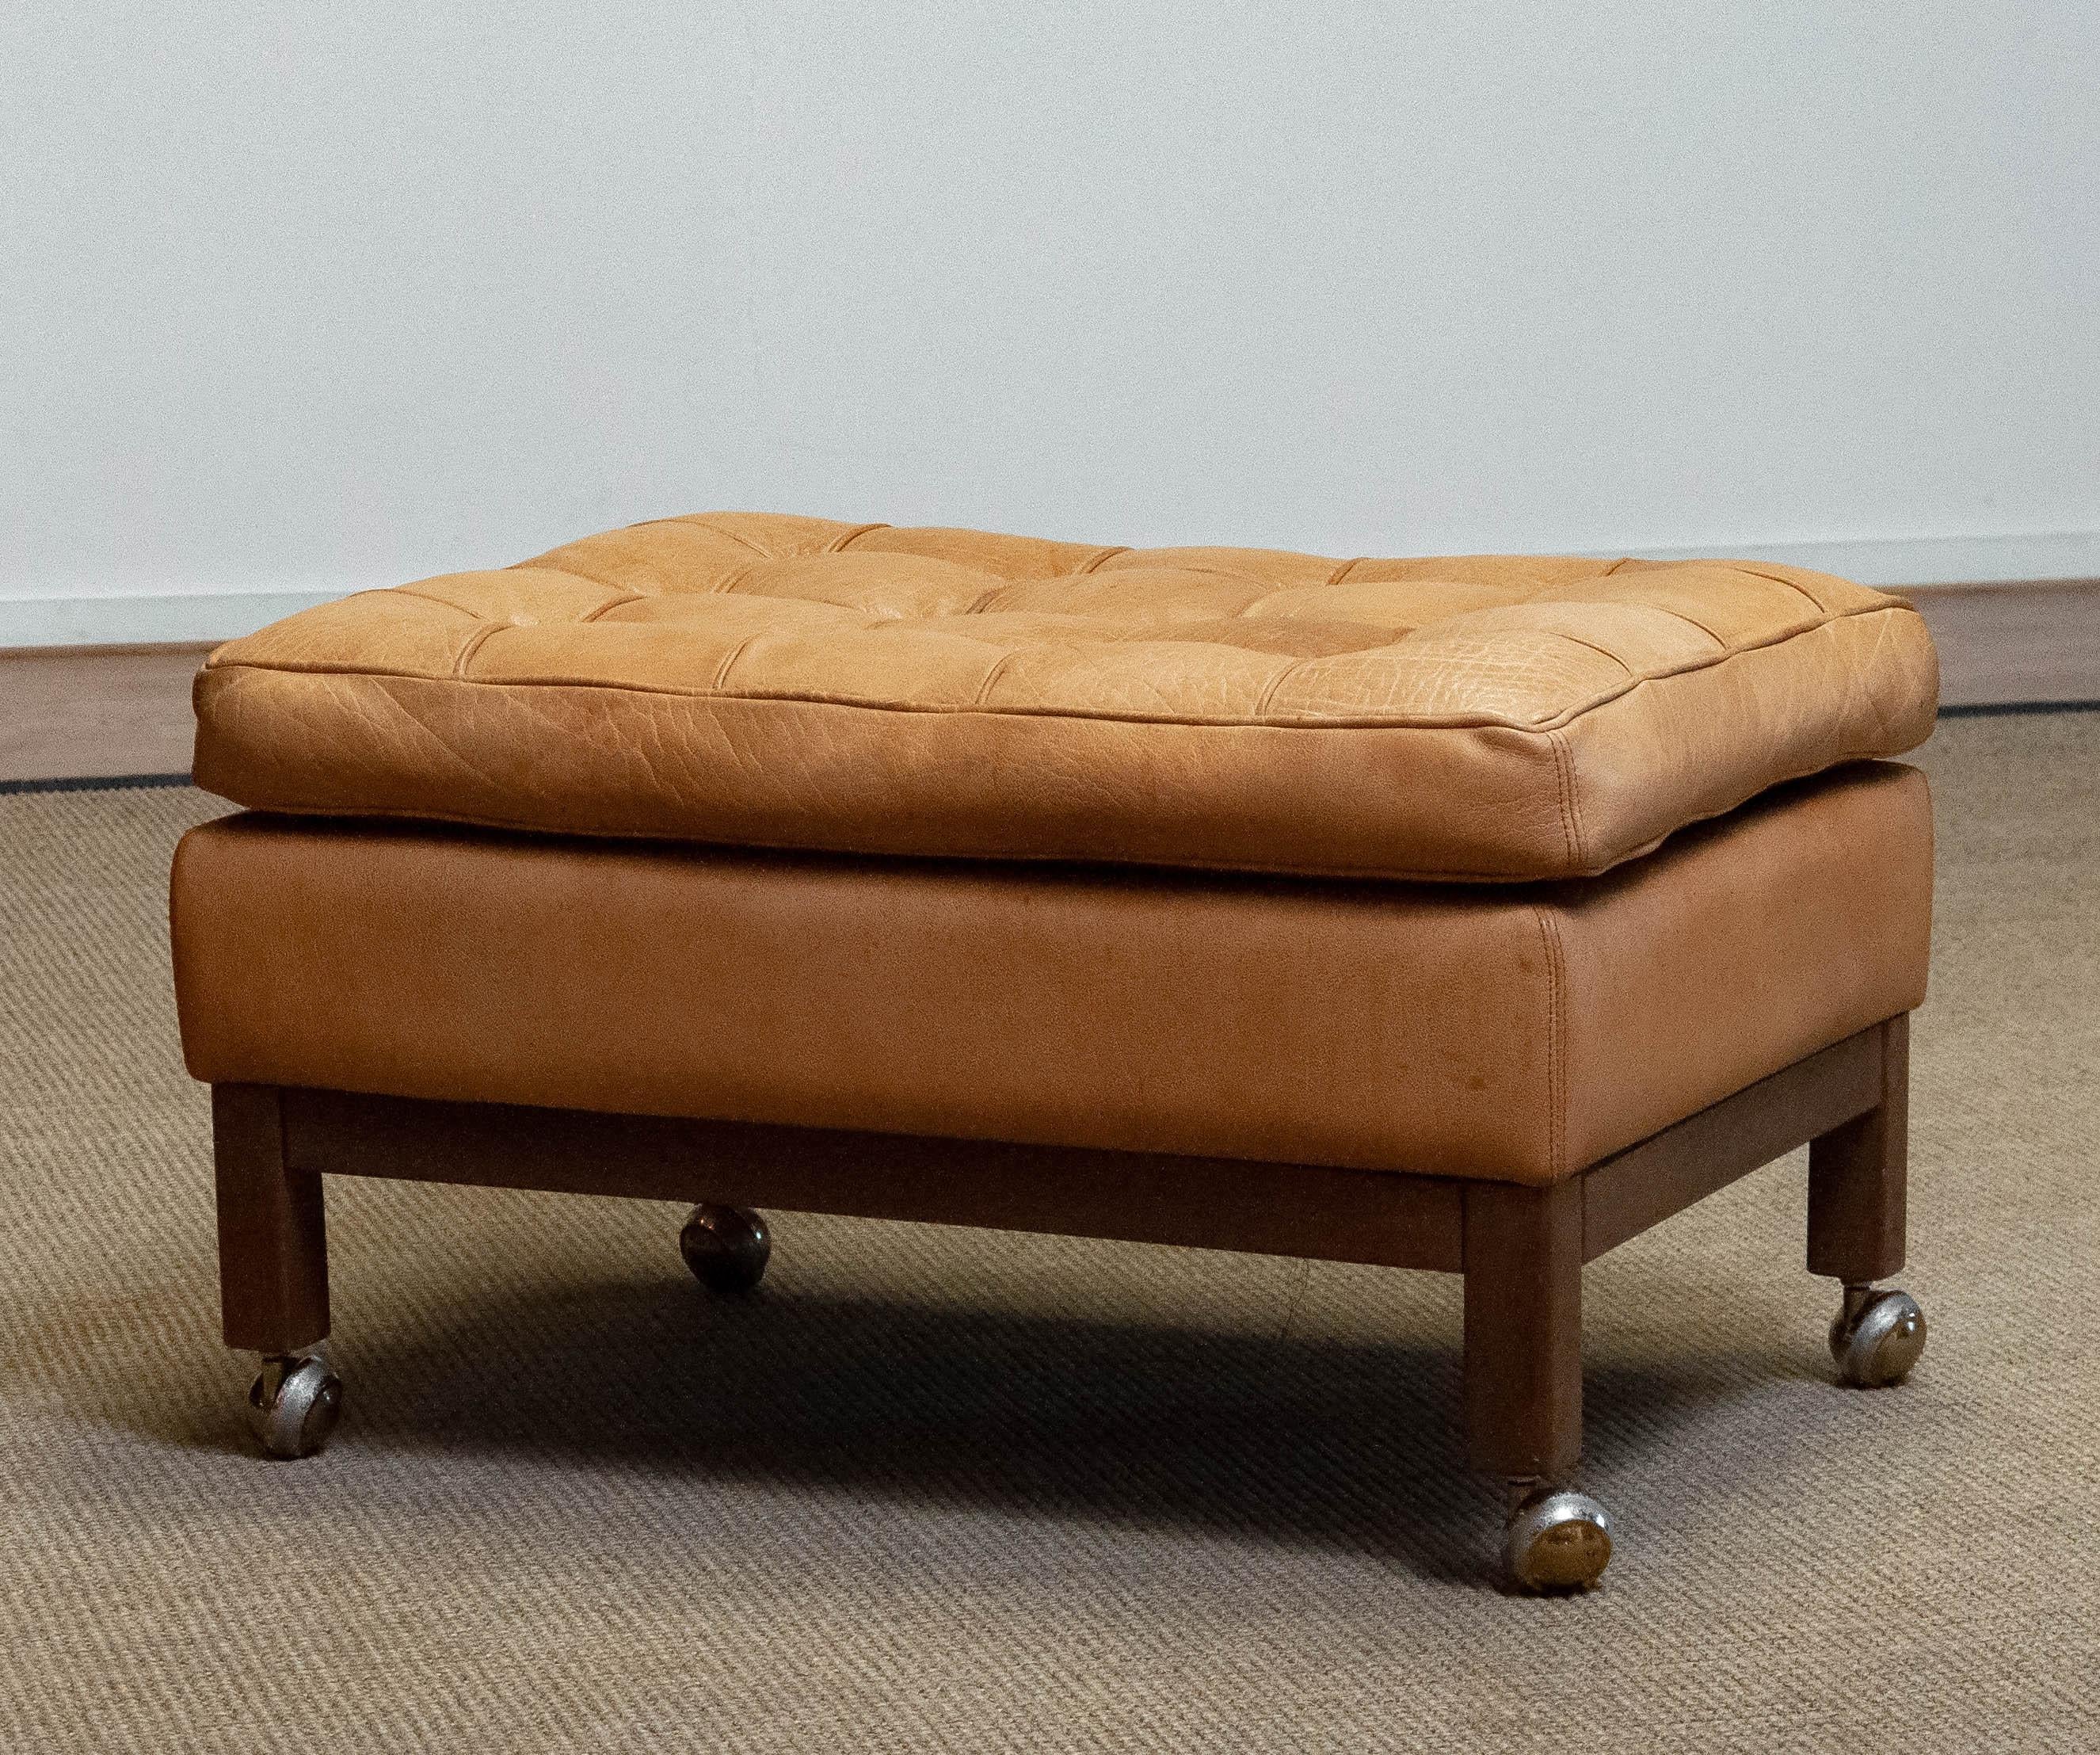 Square ottoman in sturdy camel / brown colored leather designed by Arne Norell for Norell AB in Sweden. The brown wooden frame is made of Oak. Allover in good condition.

Please note!
Because Shipping Costs highly fluctuate daily, we kindly ask you